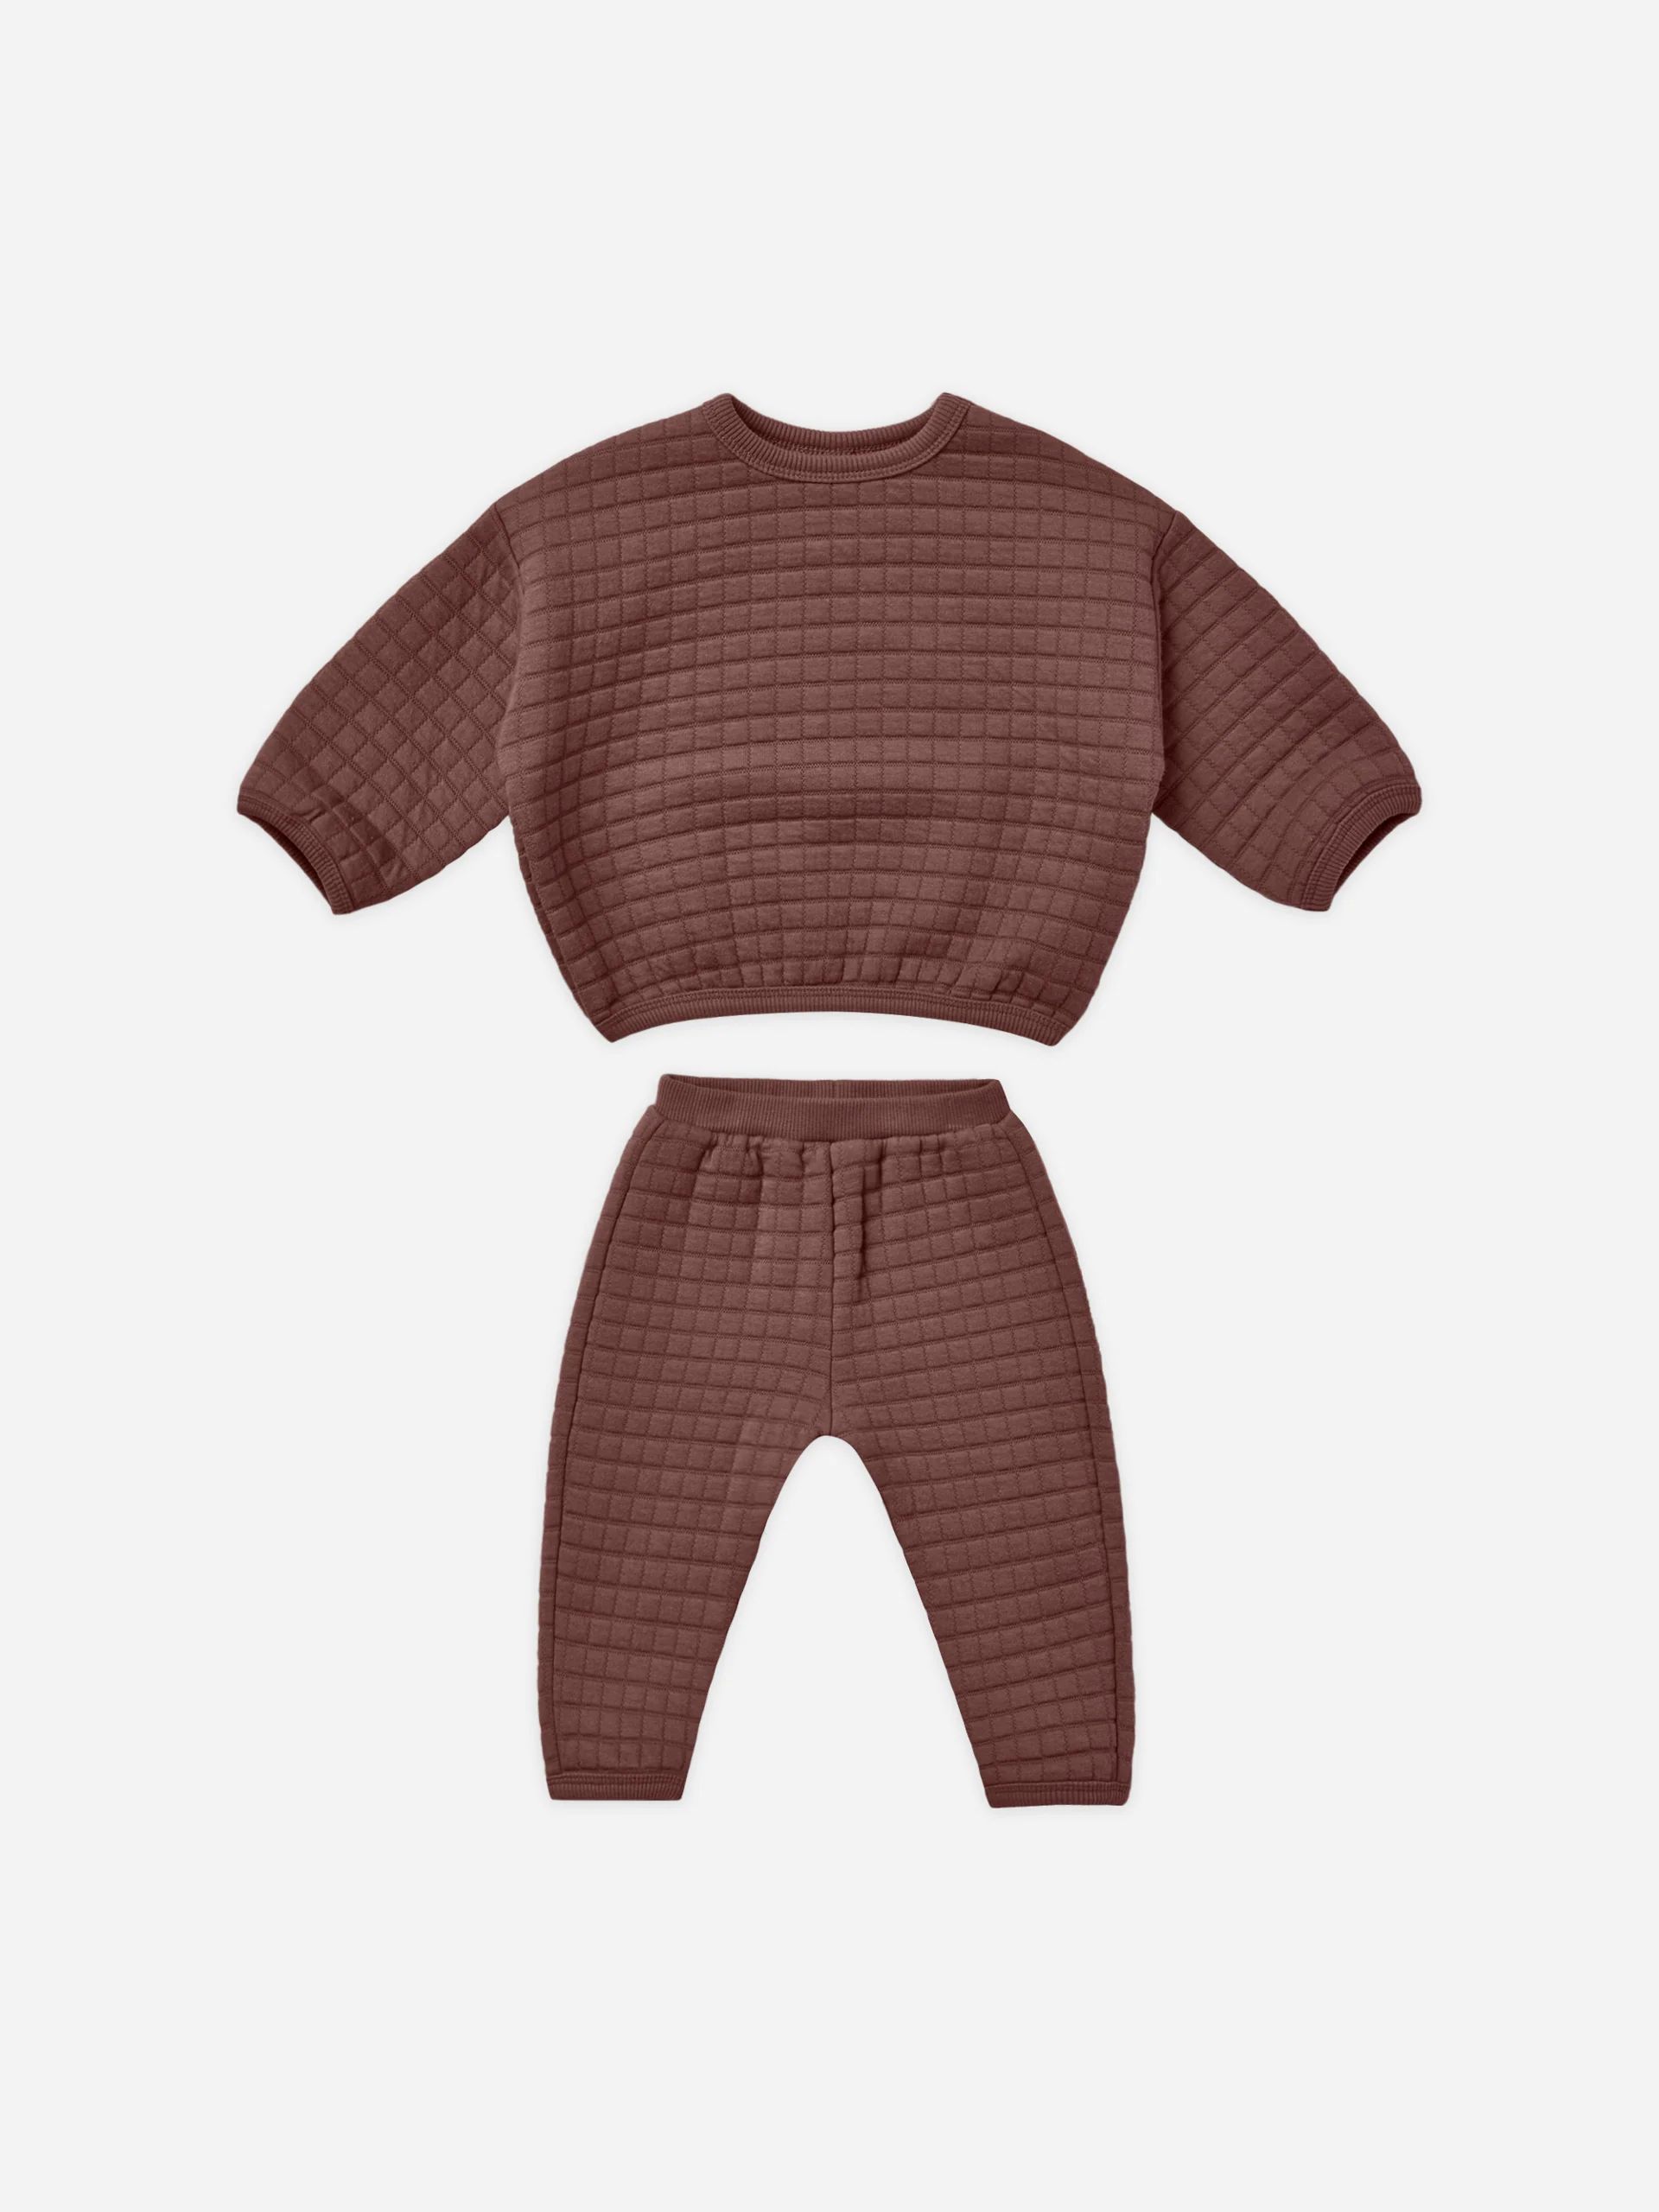 Quilted Sweater + Pant Set || Plum | Rylee + Cru